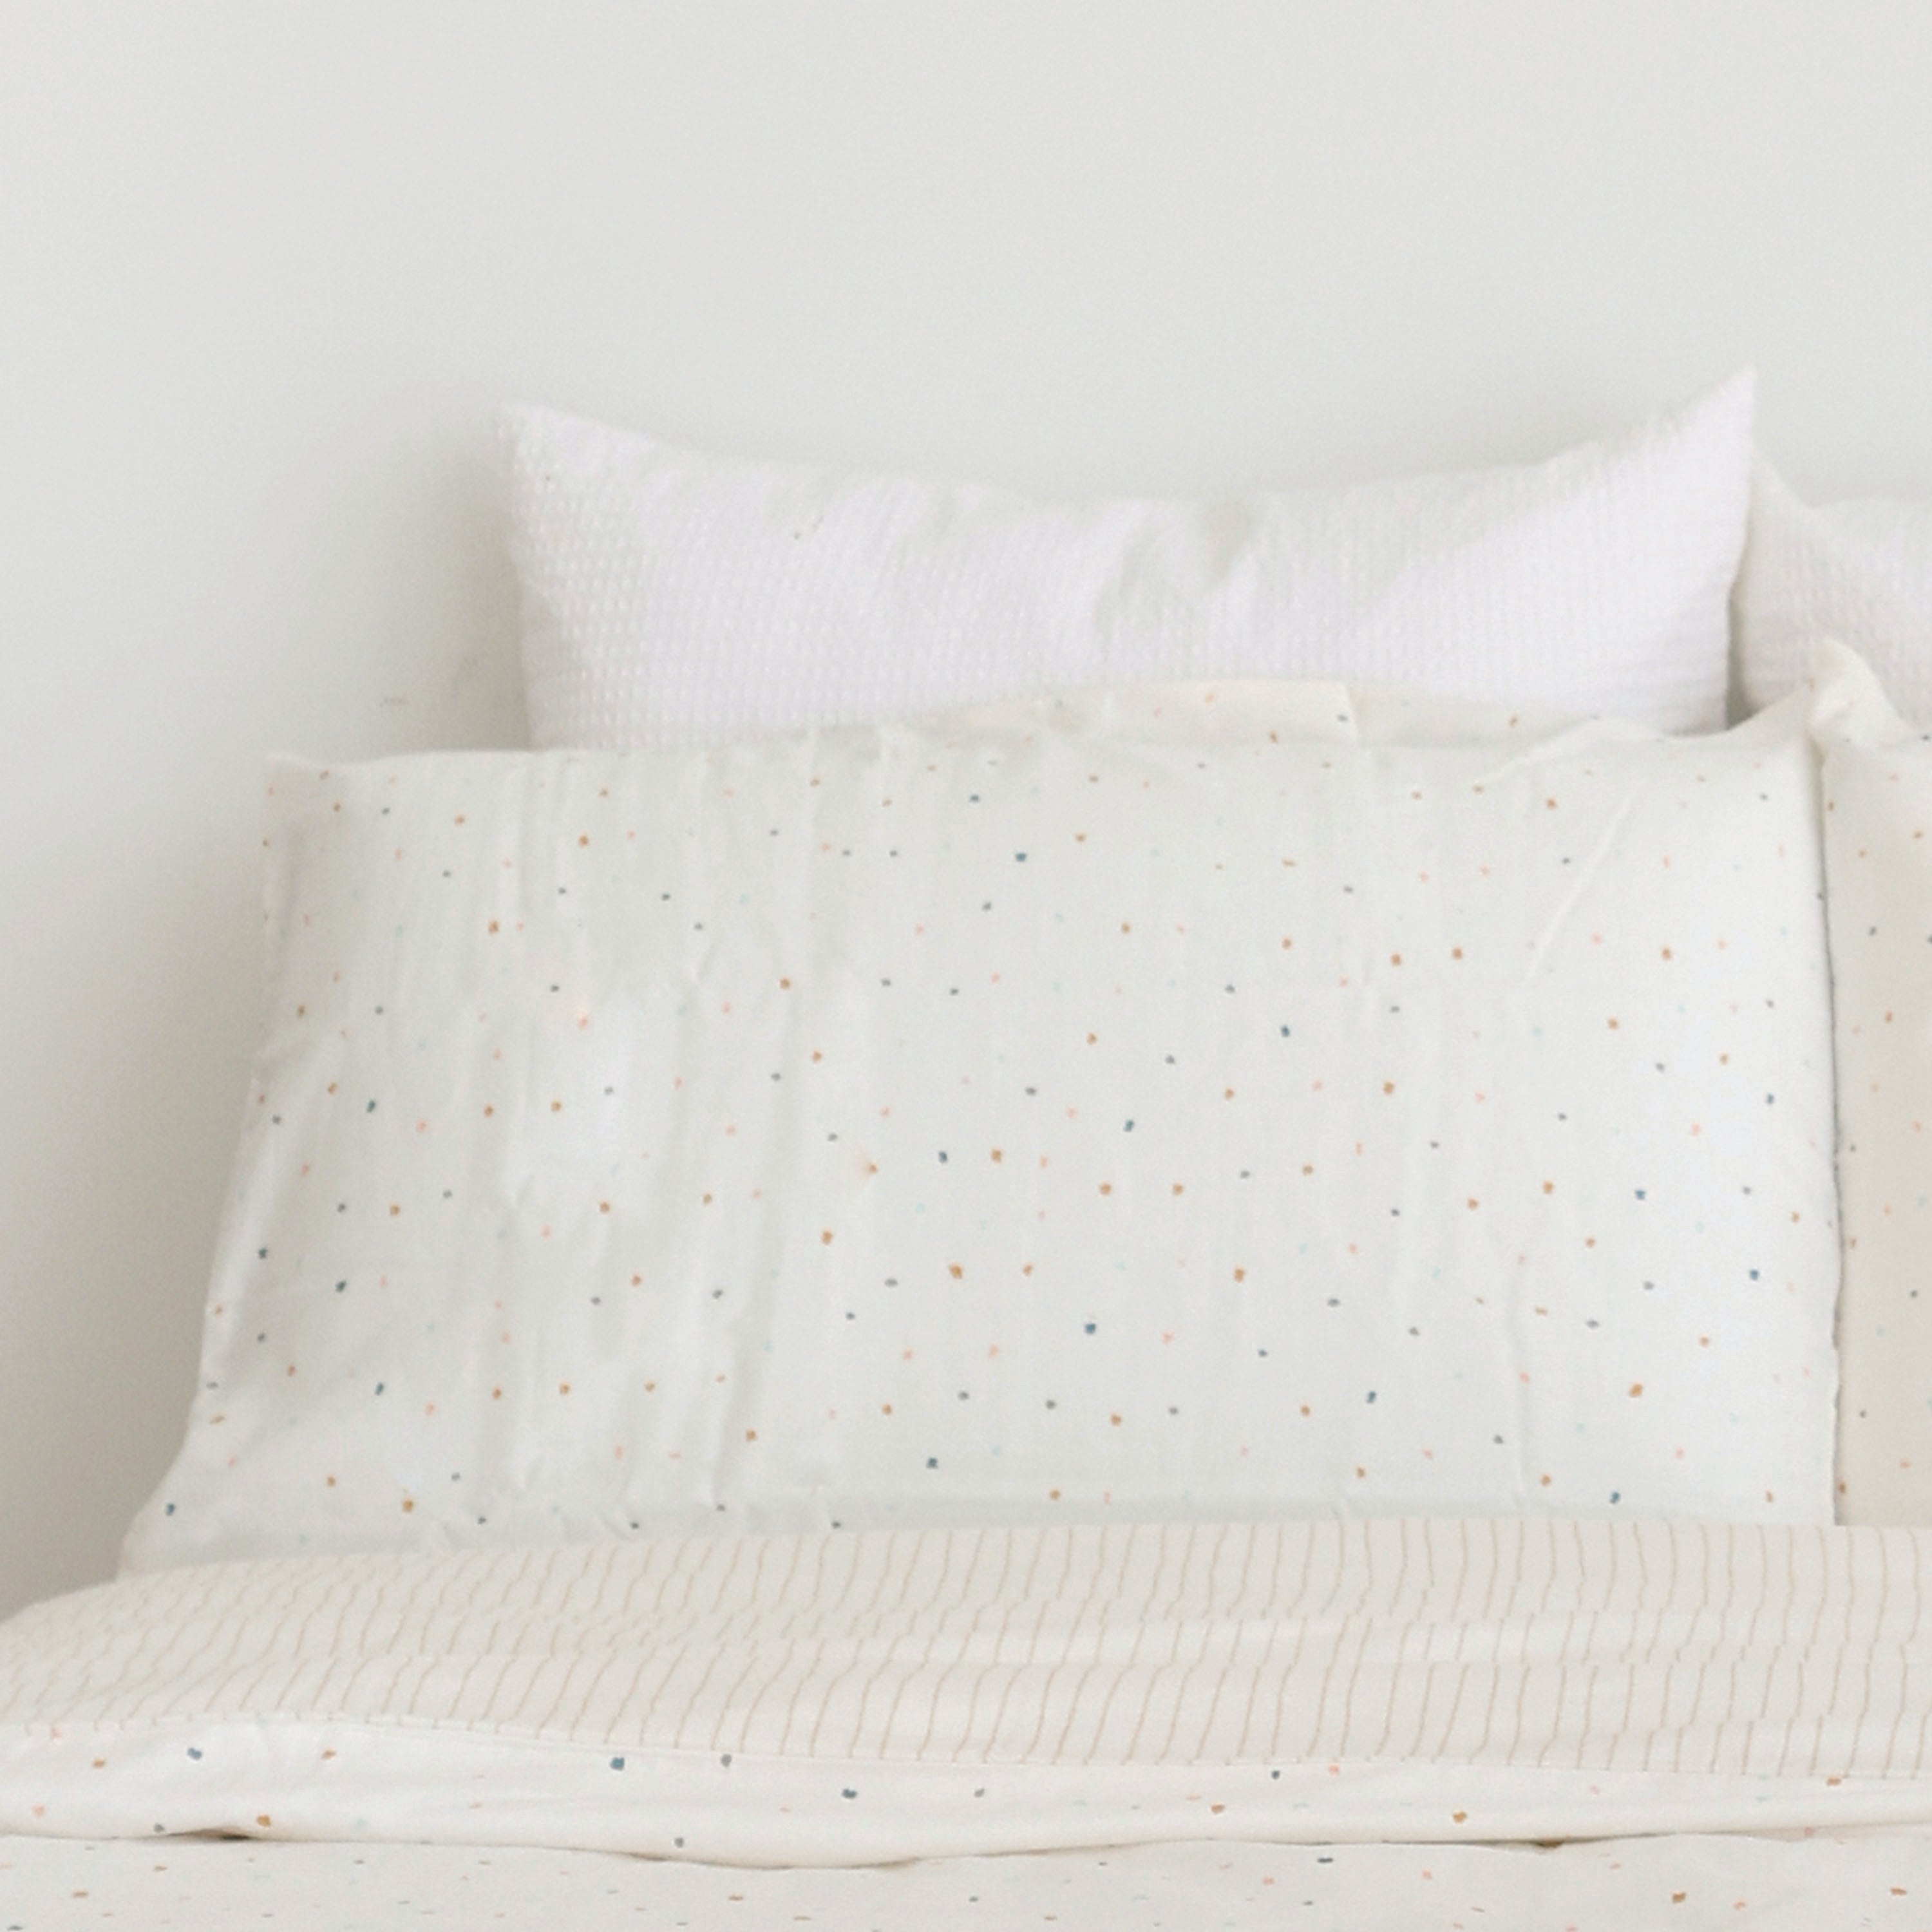 A neatly made double bed with white and polka dot bedding against a plain wall, showcasing two pillows and a clean, tranquil vibe with the Organic Cotton Toddler Pillowcase - Dotty from Makemake Organics.